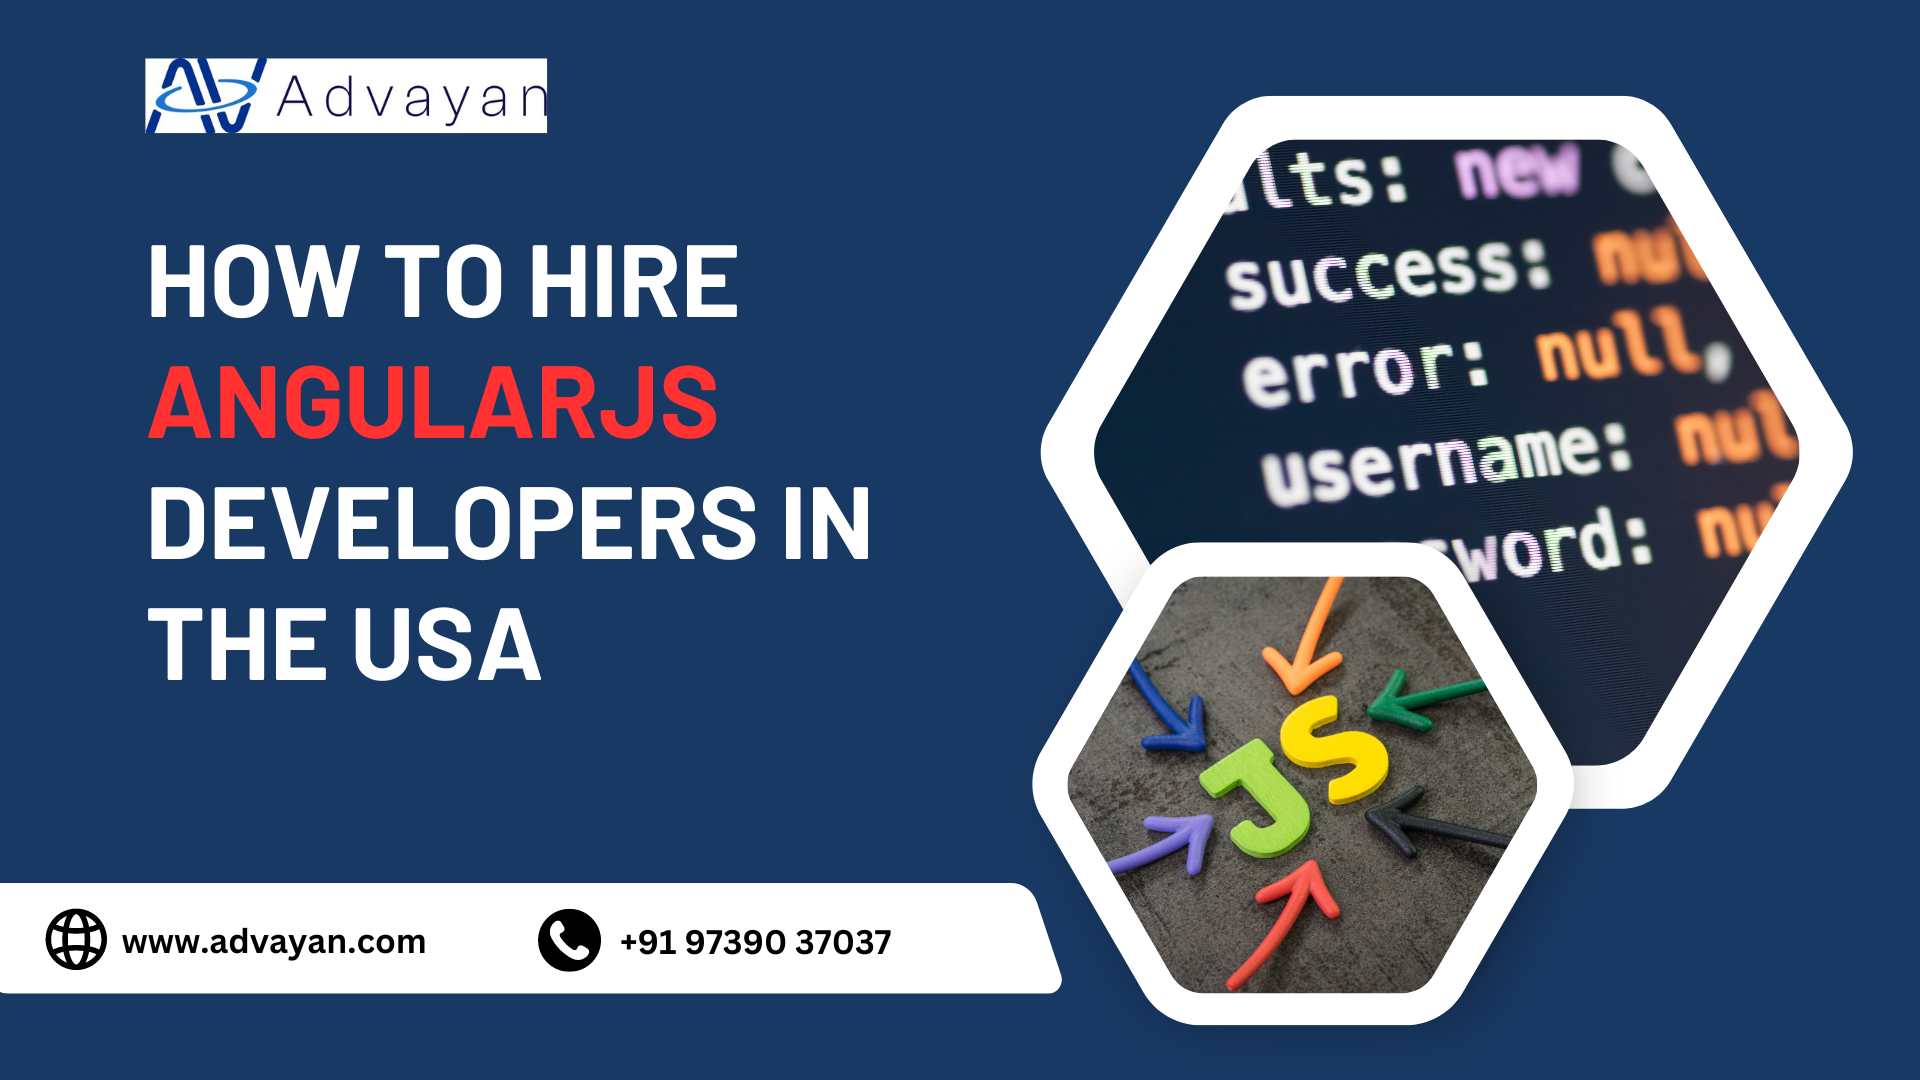 How to Hire AngularJS Developers in the USA